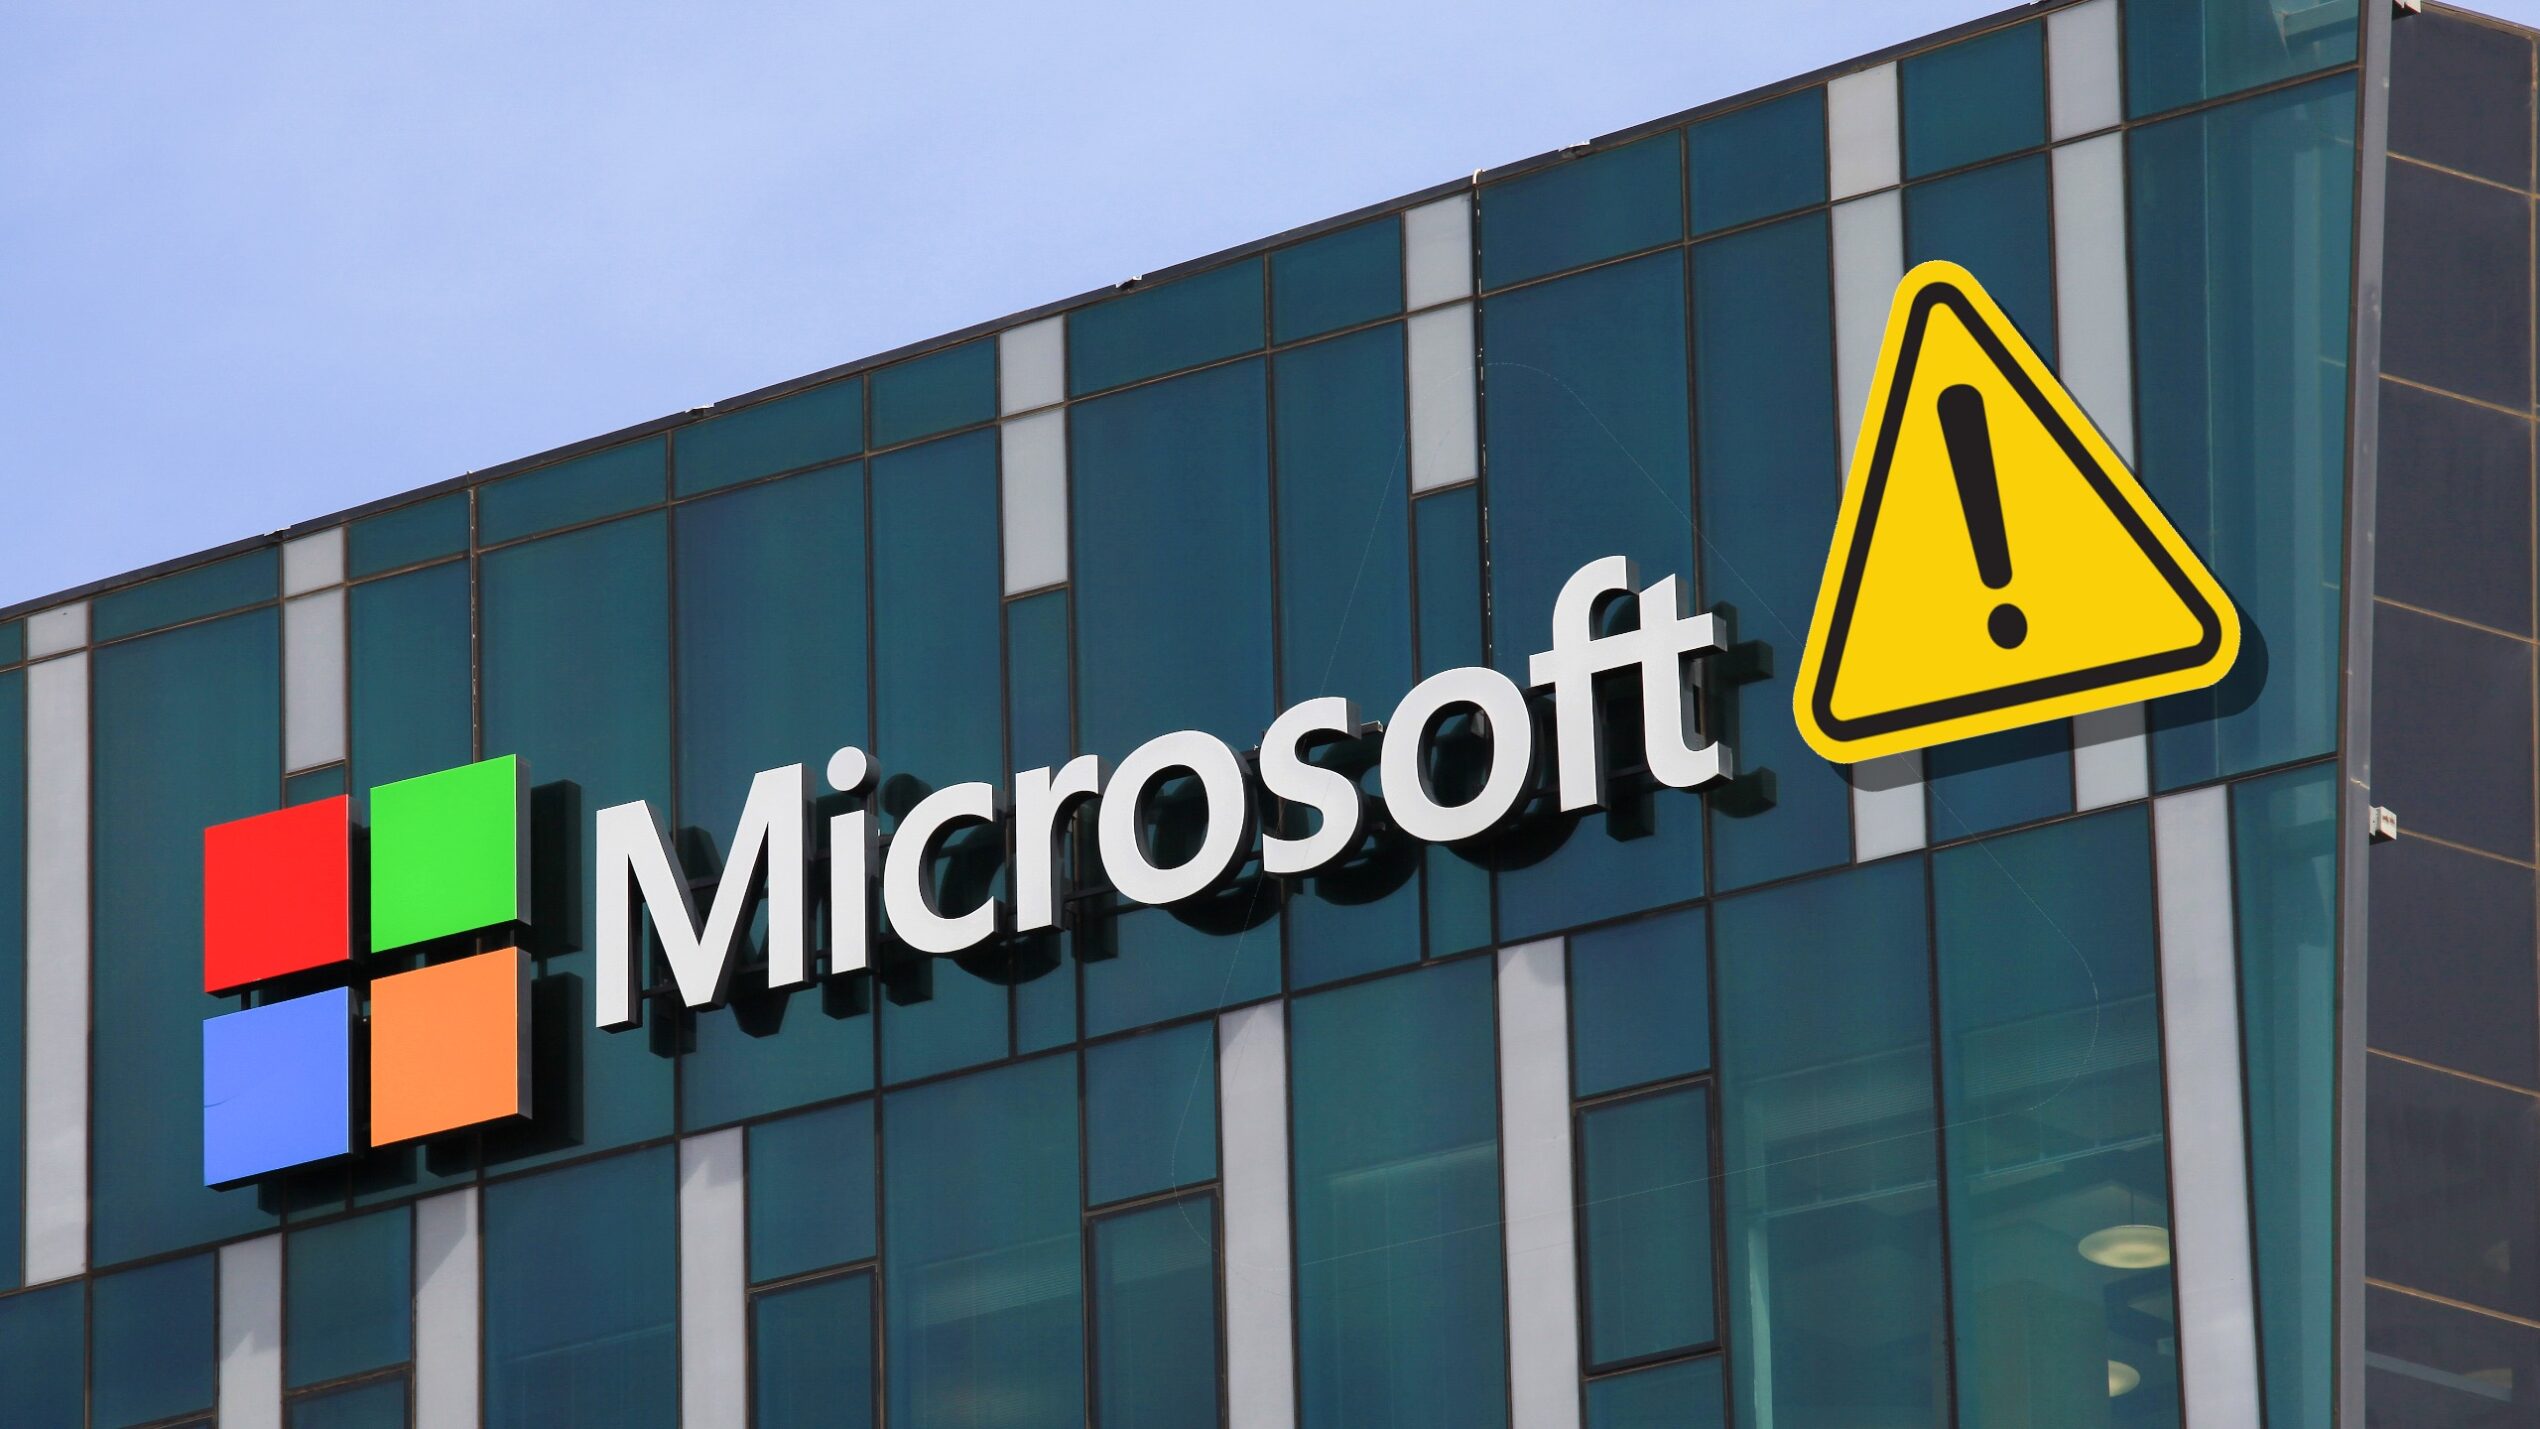 Microsoft Warns Employees Not to Share Sensitive Data with ChatGPT